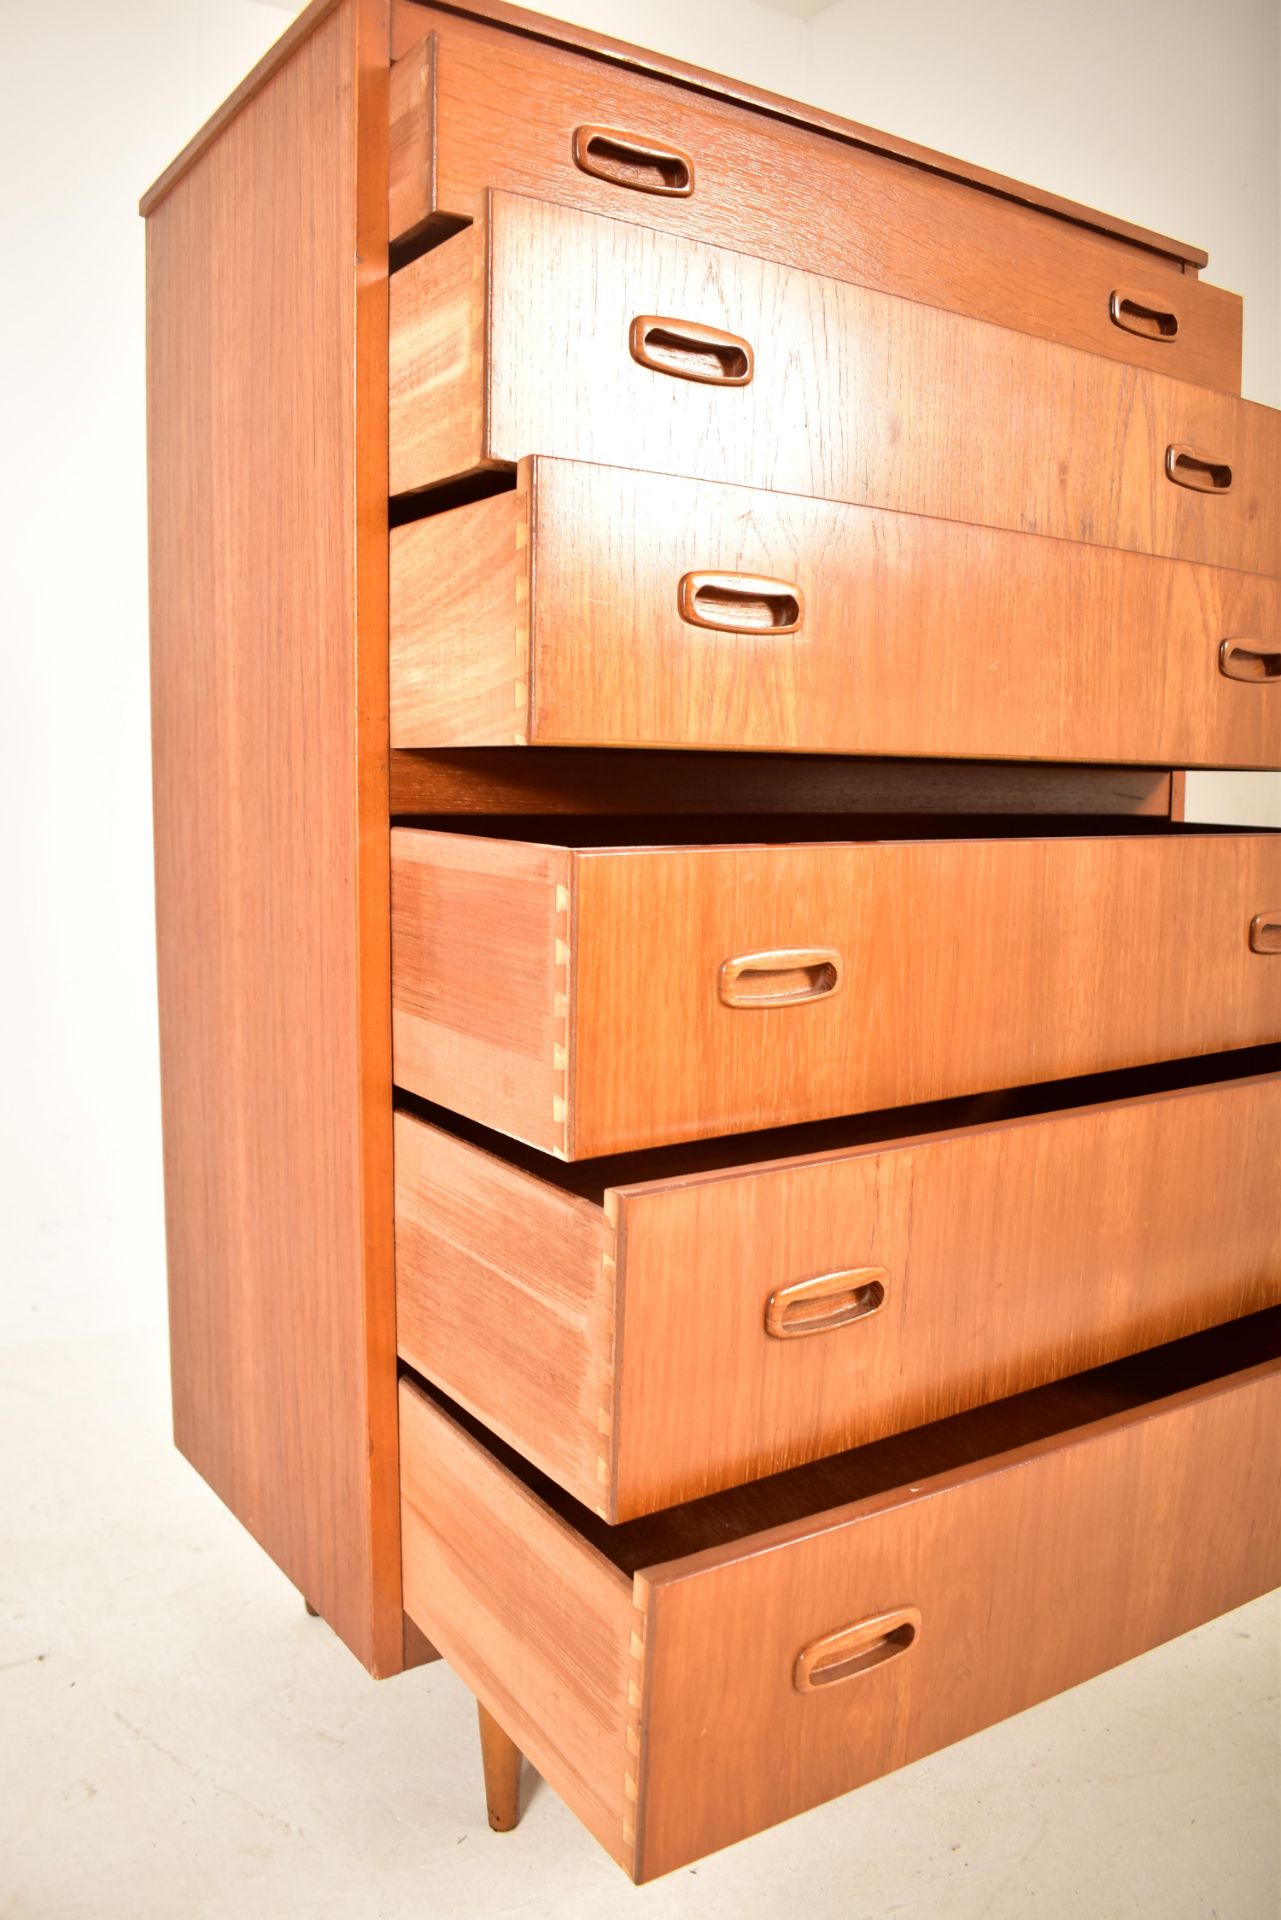 LEBUS FURNITURE - MID CENTURY TEAK UPRIGHT CHEST OF DRAWERS - Image 4 of 5